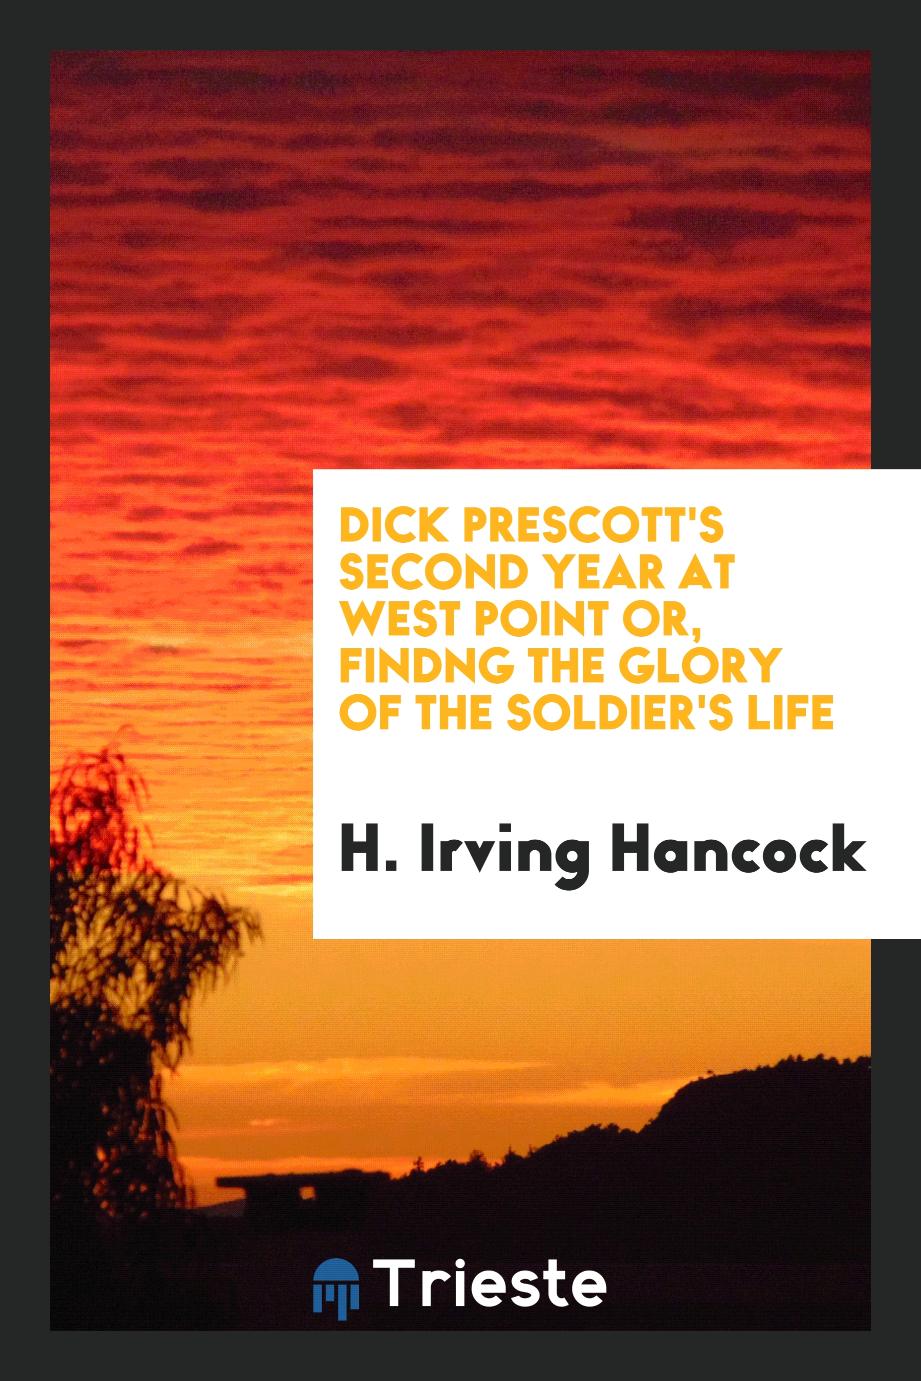 Dick Prescott's second year at West Point or, Findng the glory of the soldier's life